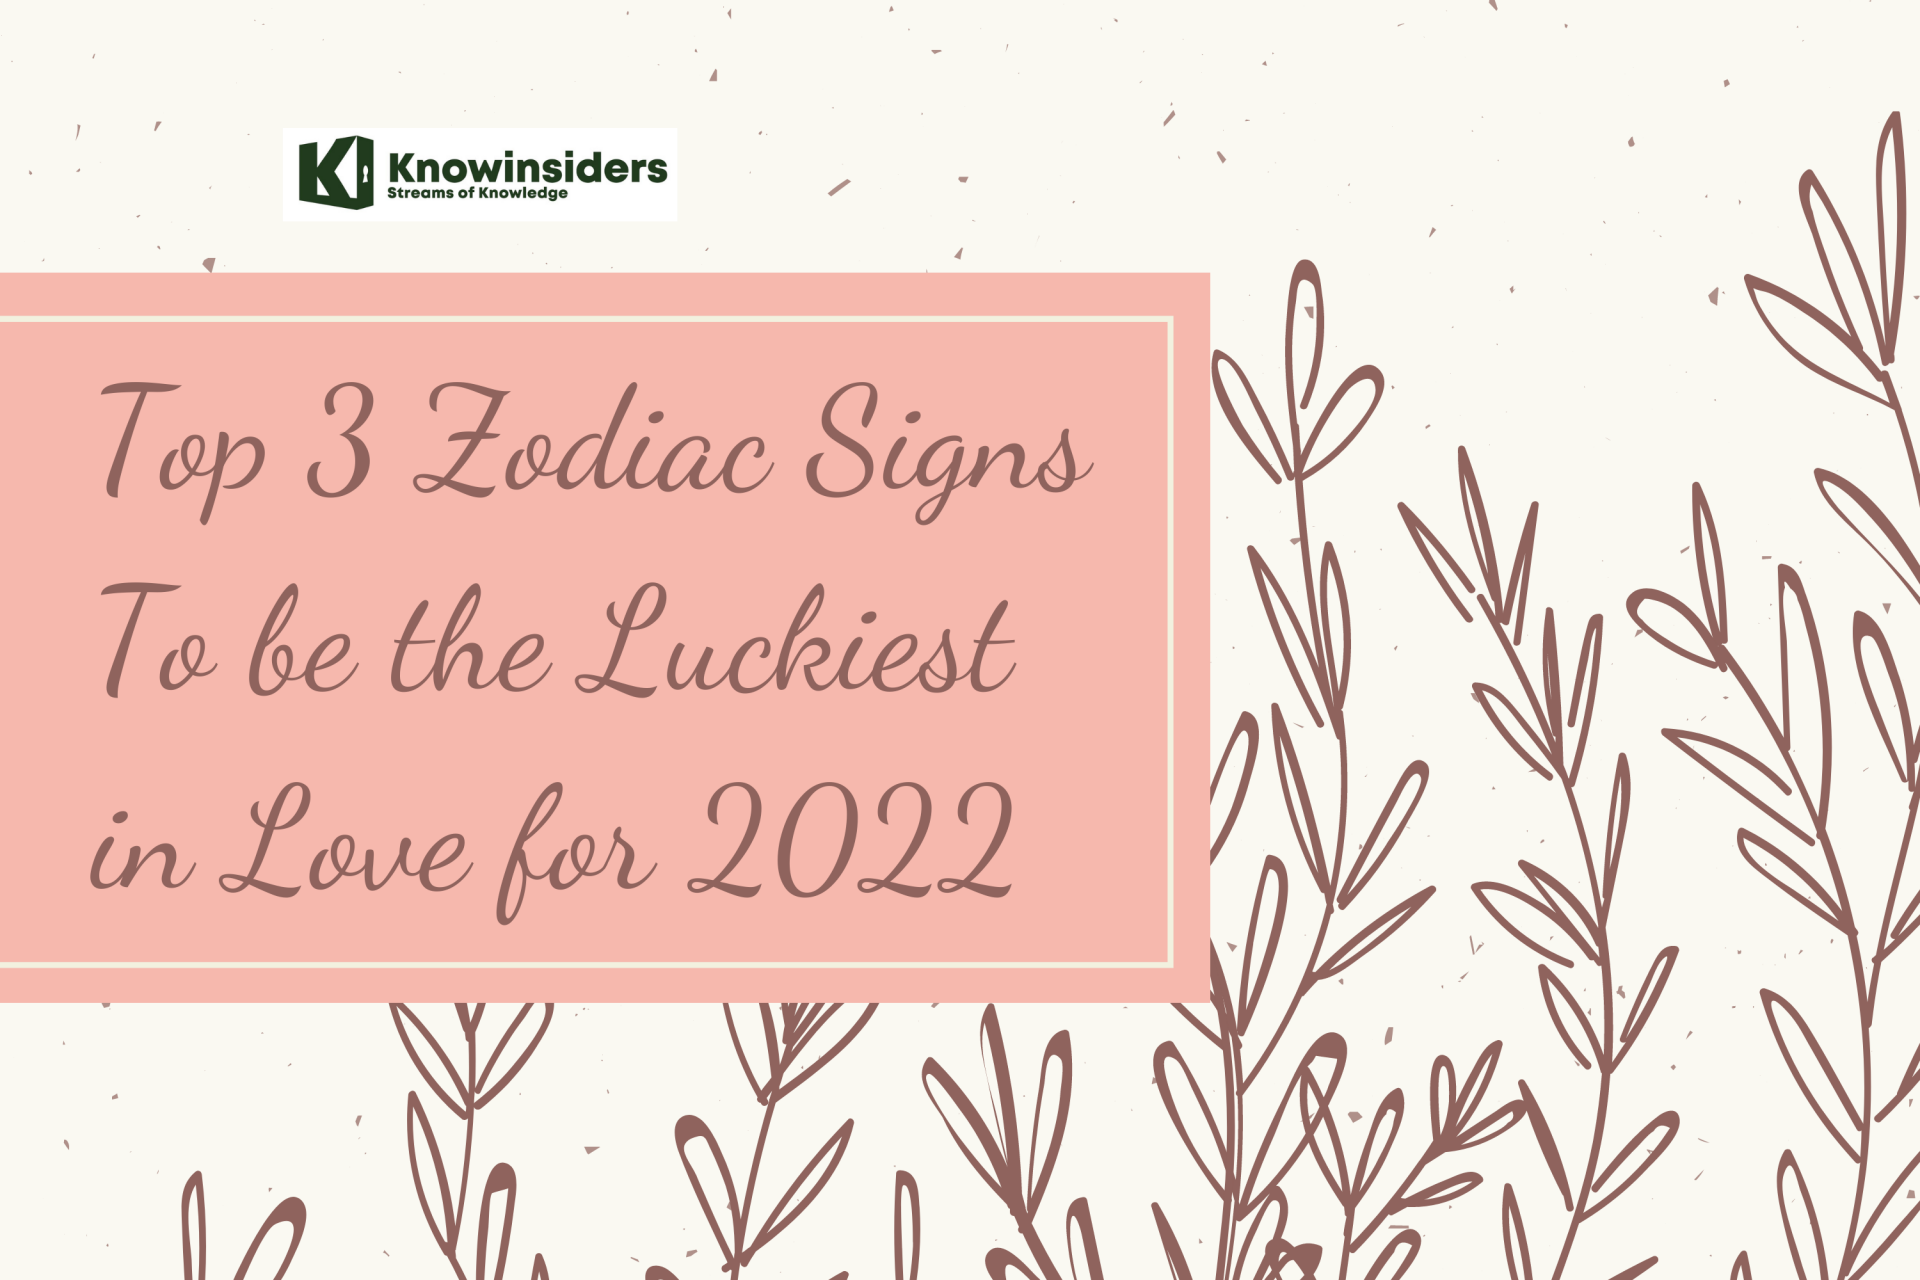 Top 3 Zodiac Signs To be the Luckiest in Love for 2022